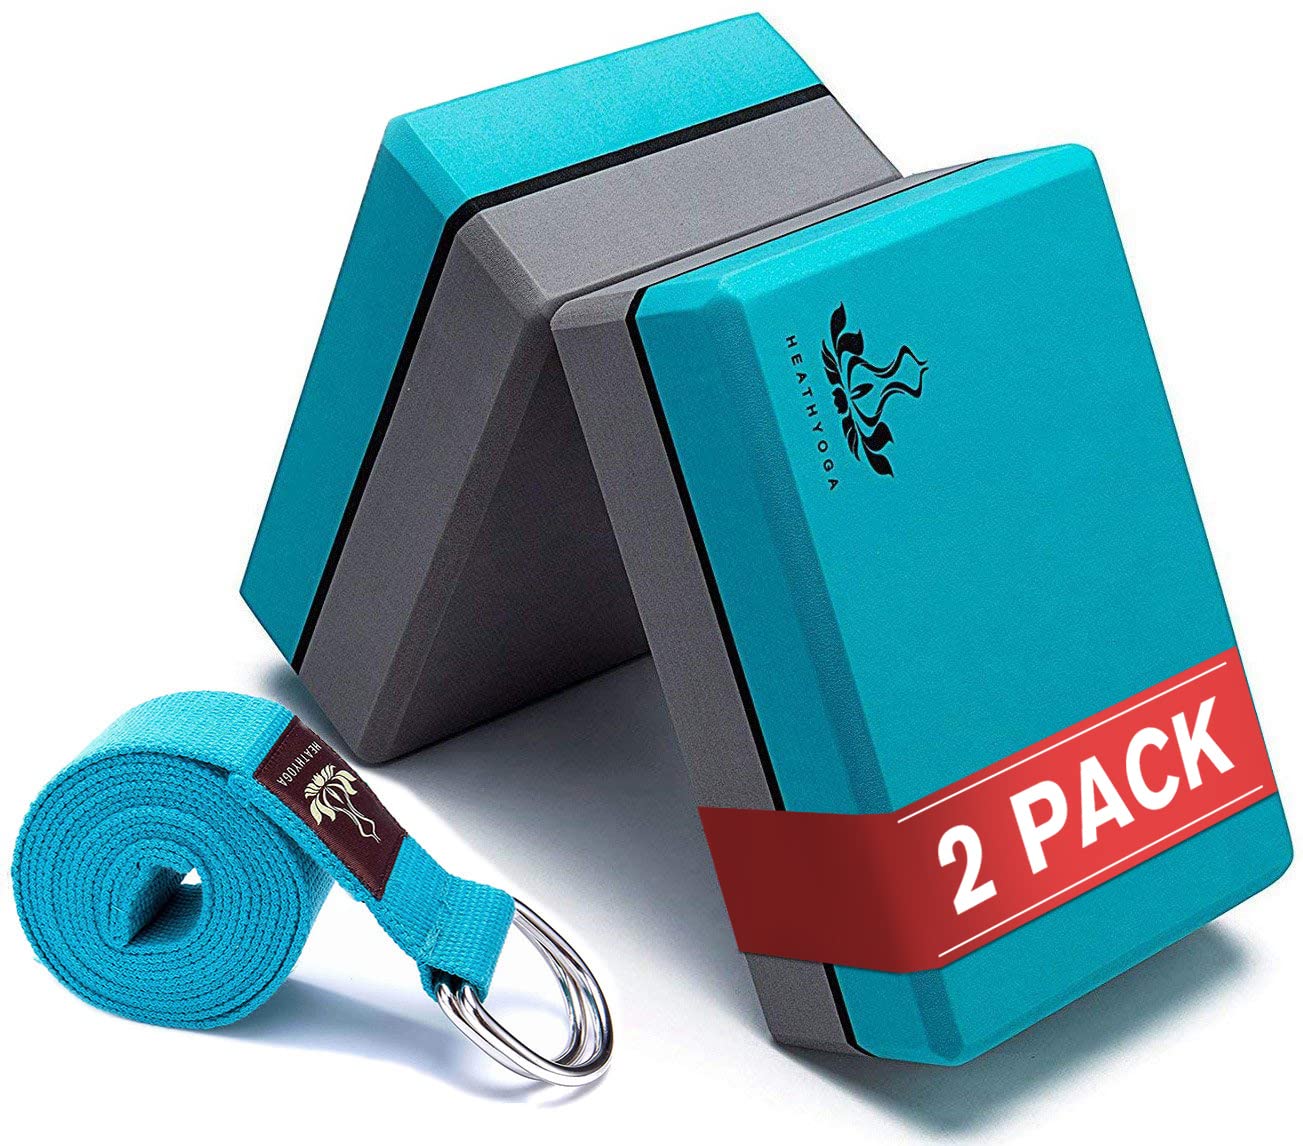 Heathyoga Yoga Blocks 2 Pack with Strap, High Density EVA Foam Yoga Block  and Yoga Strap Set to Support and Improve Poses and Flexibility Turquoise